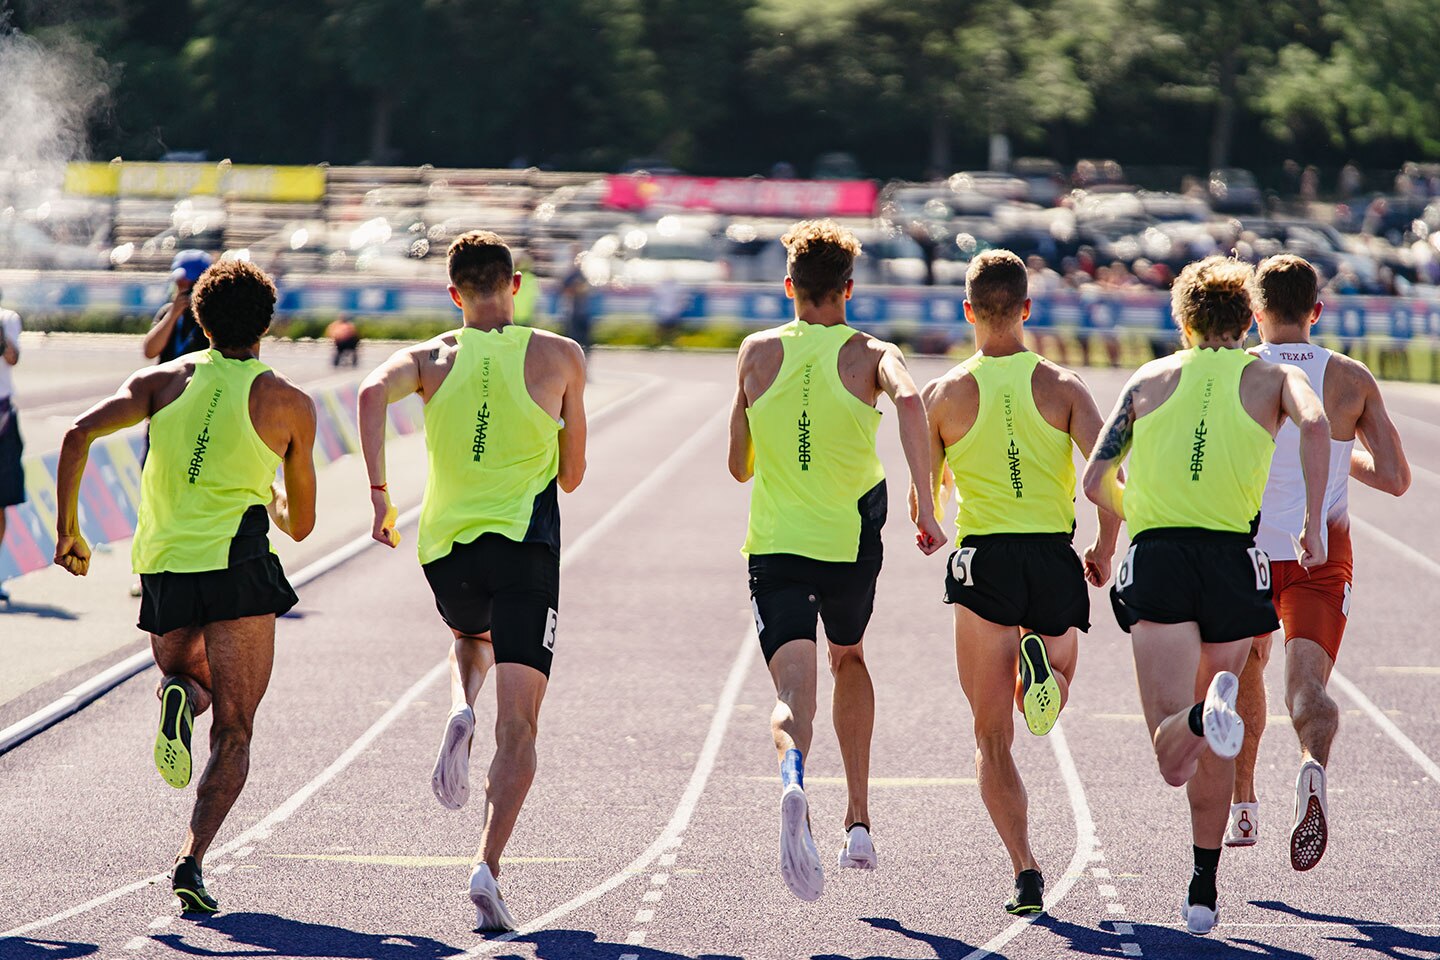 Athletes running on a track from behind in bright yellow uniforms